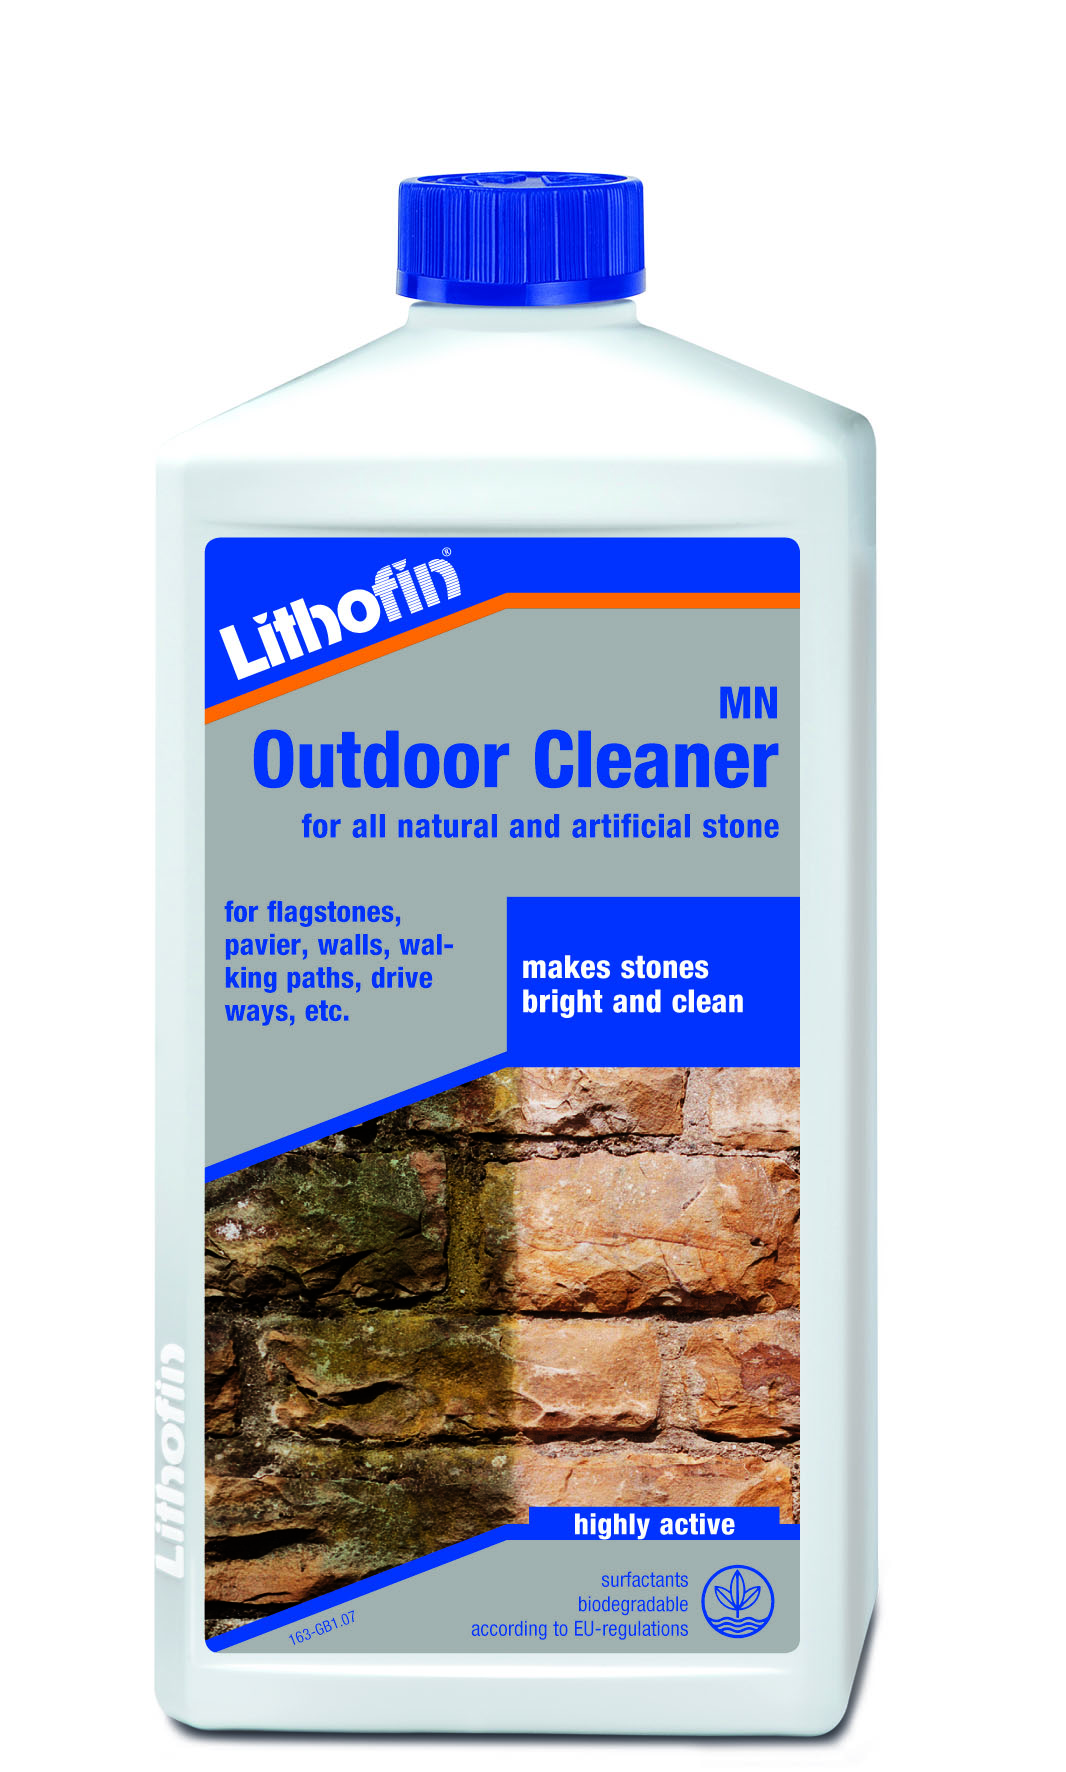 MN Outdoor cleaner technical information 